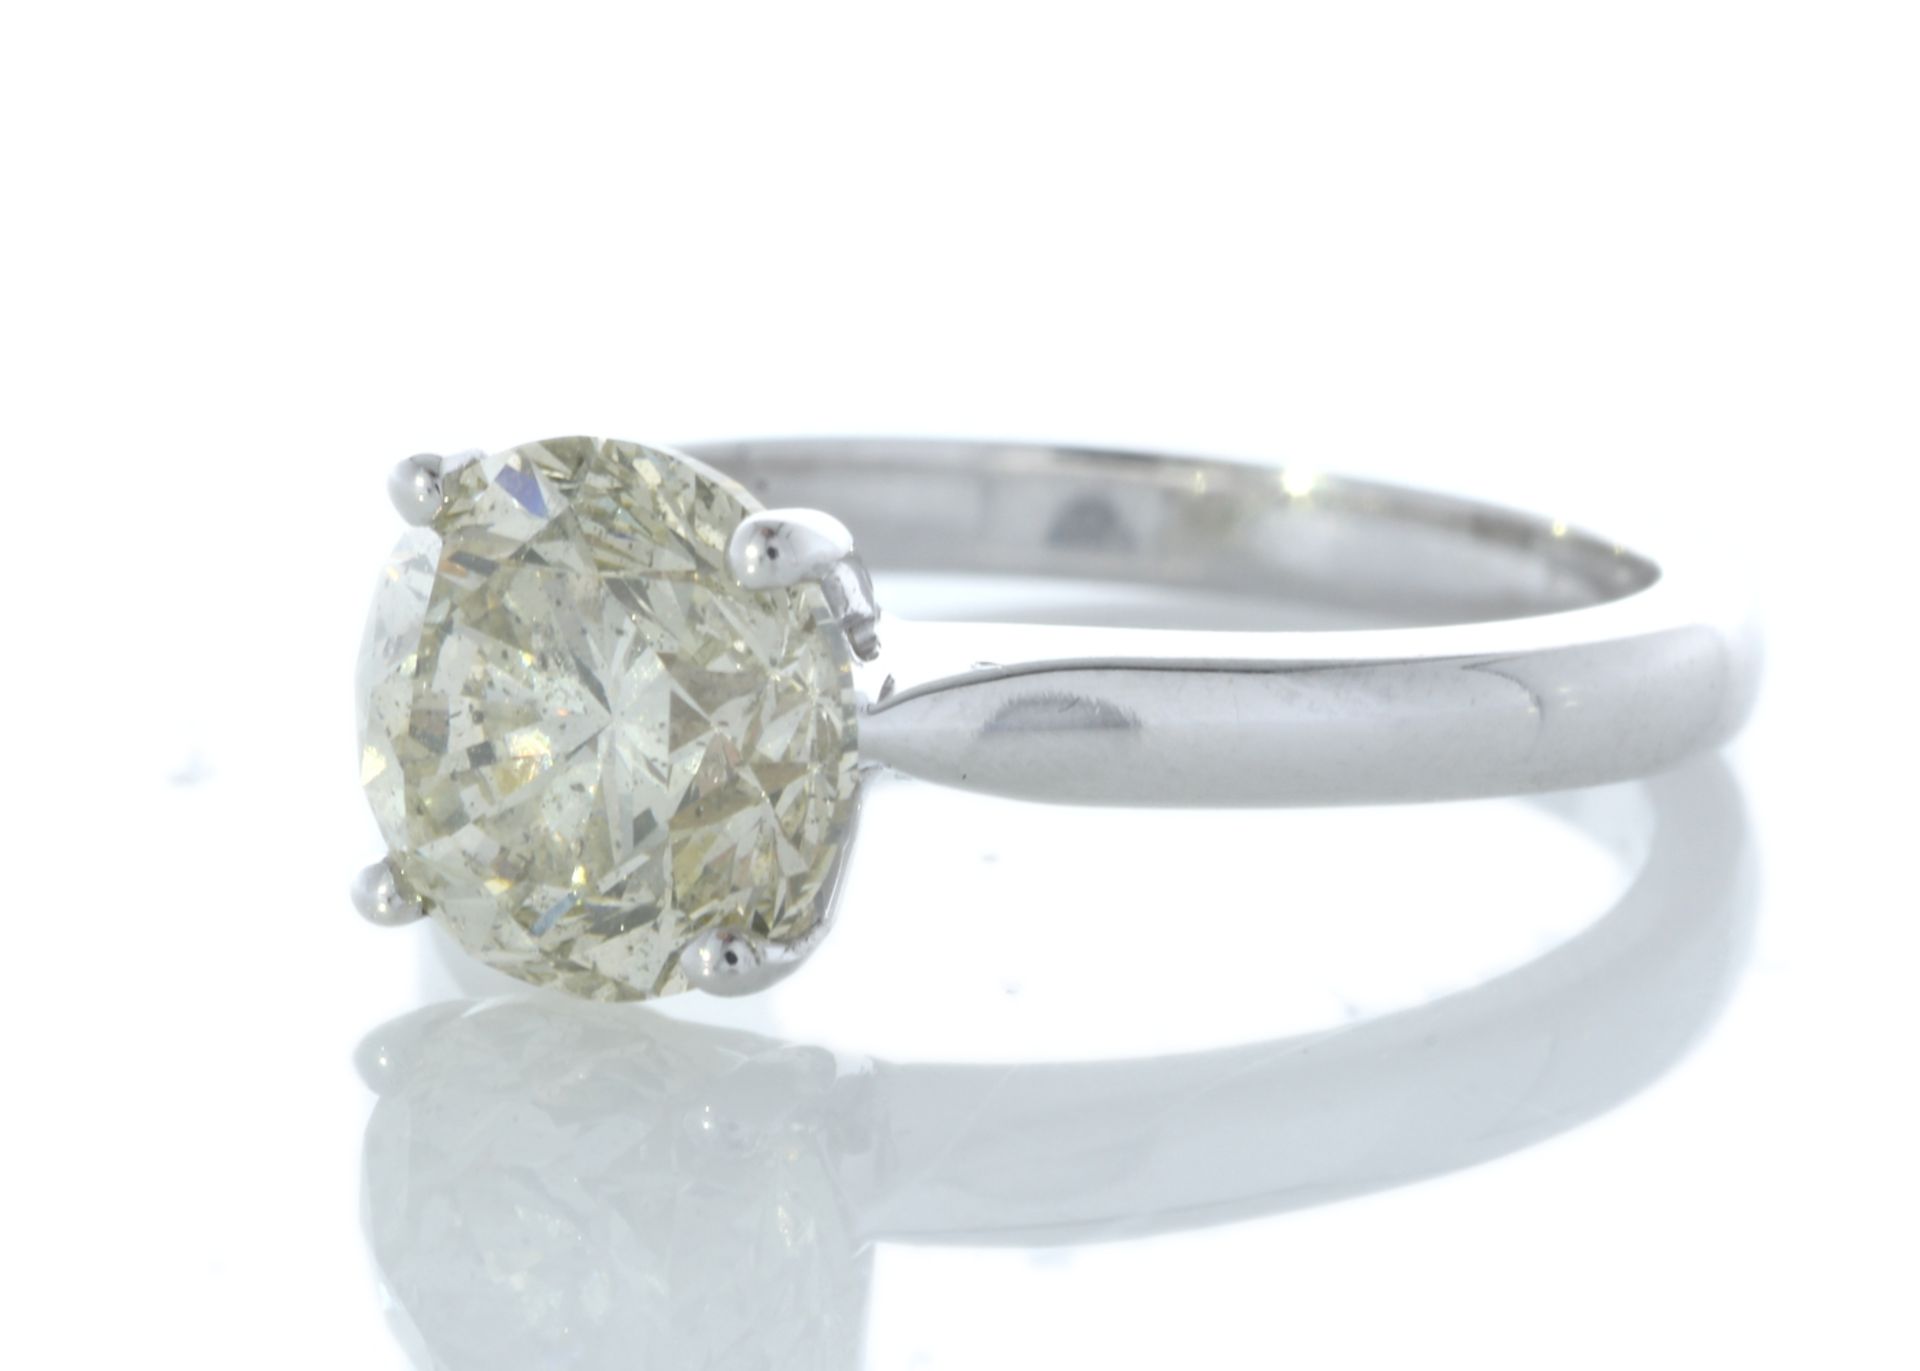 18ct White Gold Single Stone Rex Set Diamond Ring 2.29 Carats - Valued By GIE £24,315.00 - A massive - Image 2 of 5